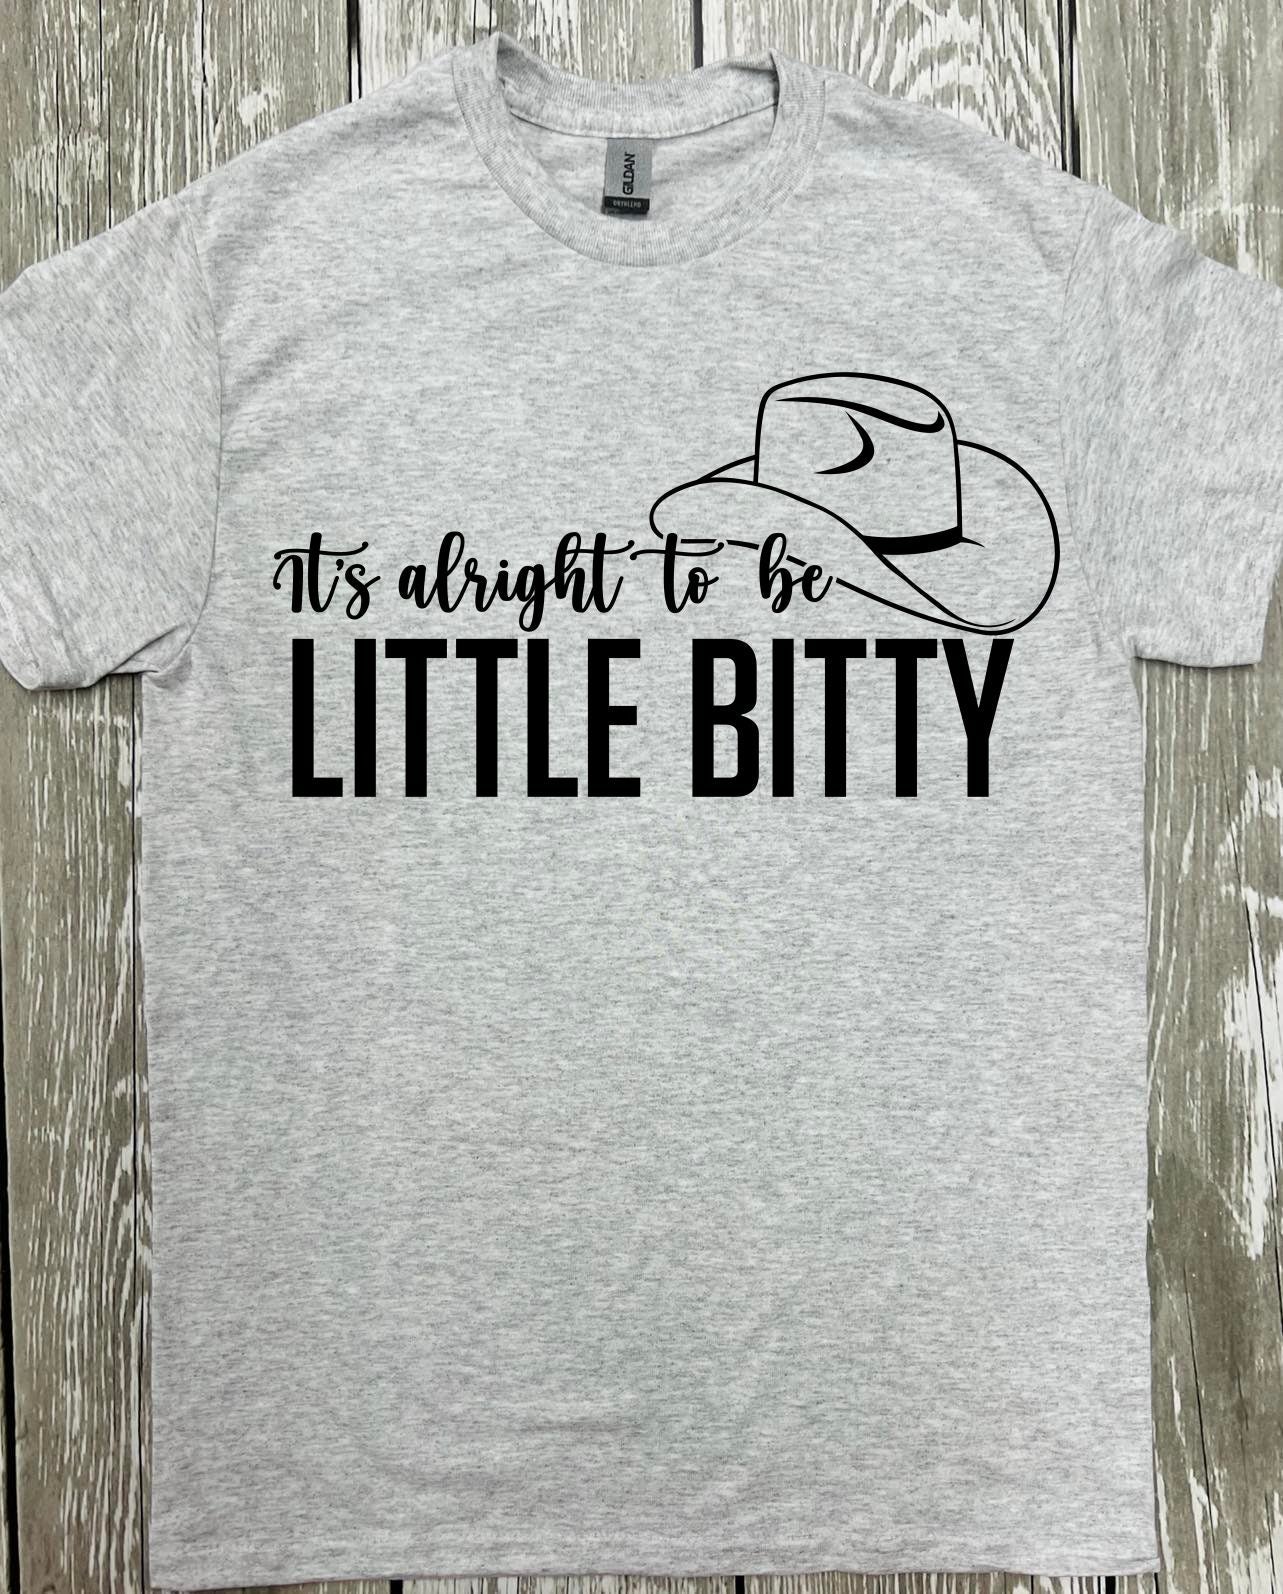 It's Alright to be Itty Bitty Ash Grey Tee